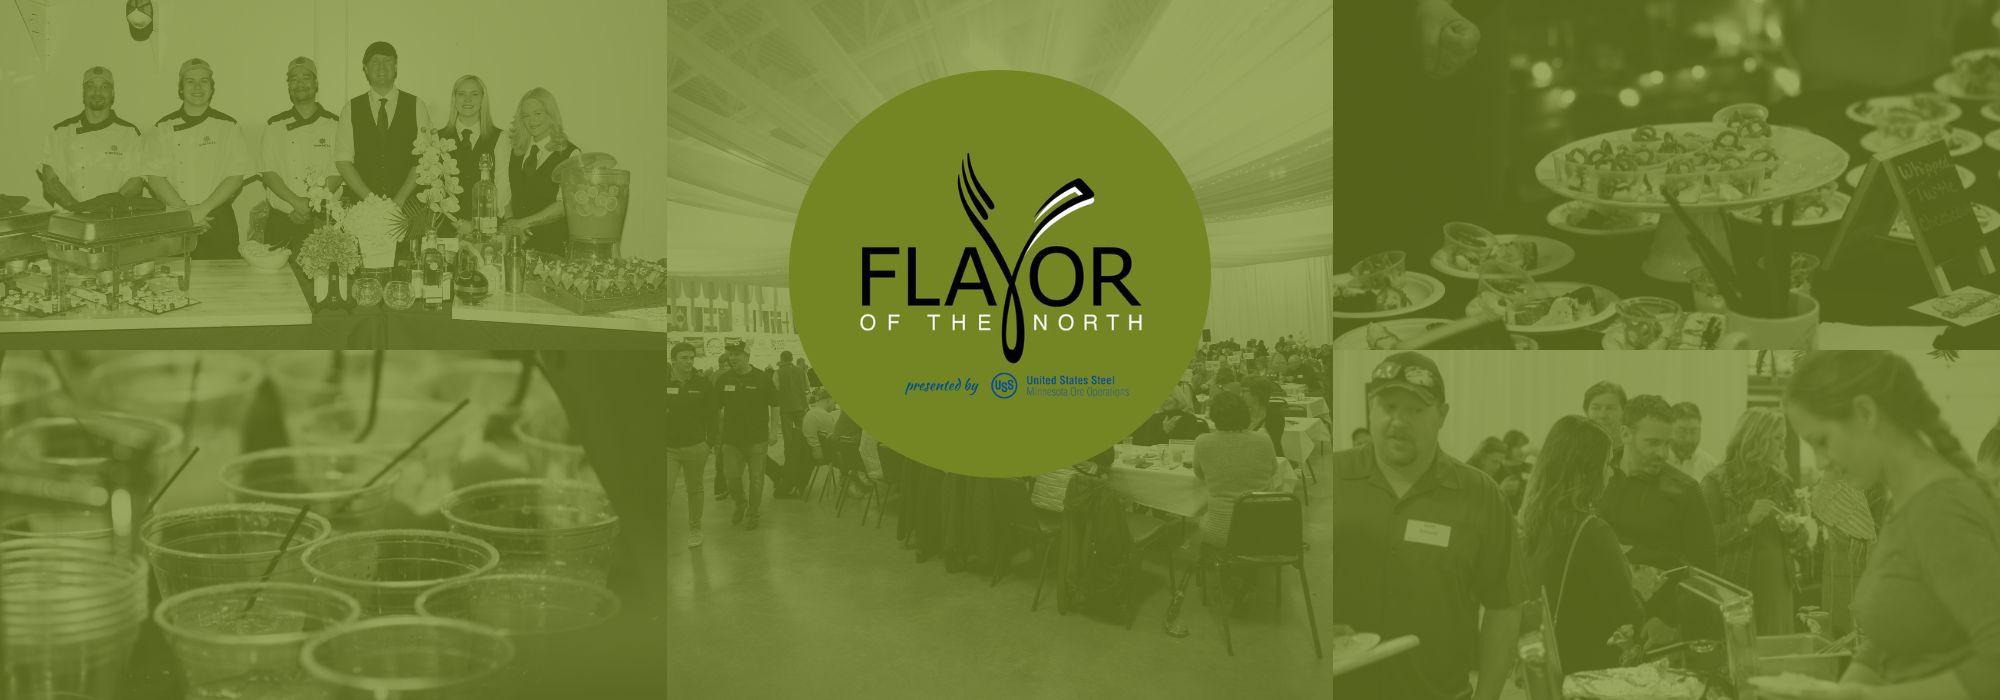 images of food, chefs from previous Flavor of the North events with a green overlay - Flavor of the North presented by U. S. Steel 